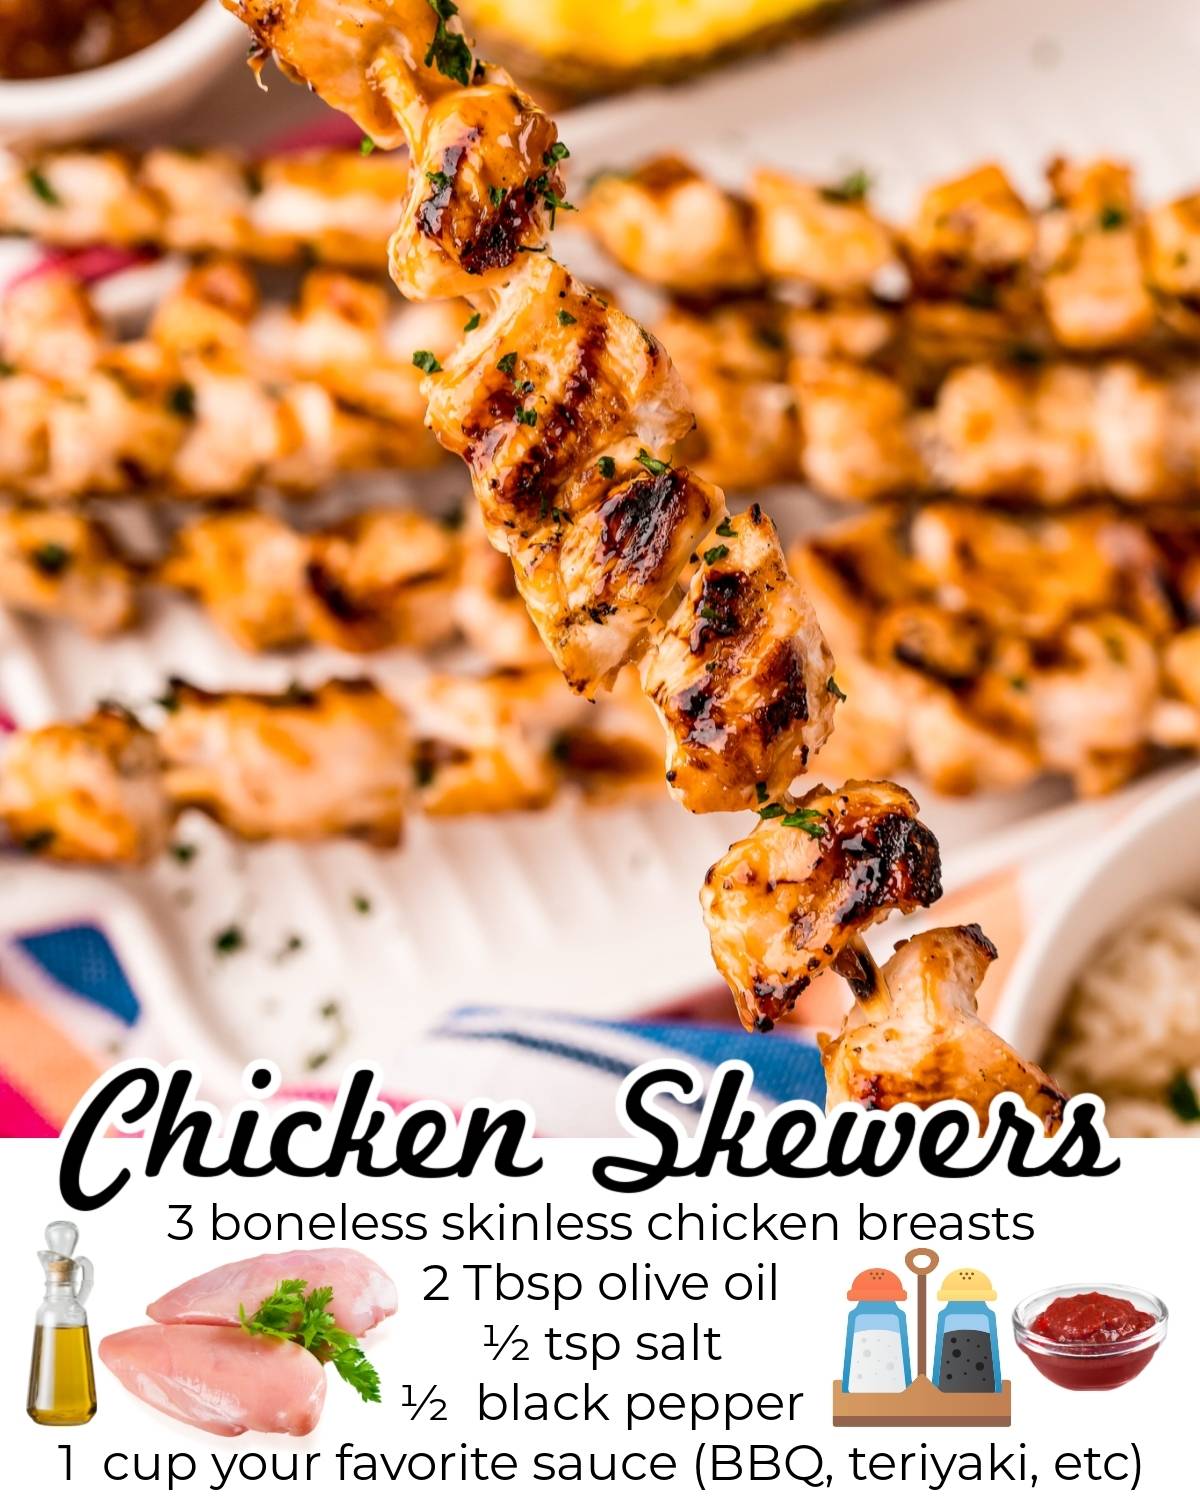 The ingredients needed to make Grilled Chicken Skewers.